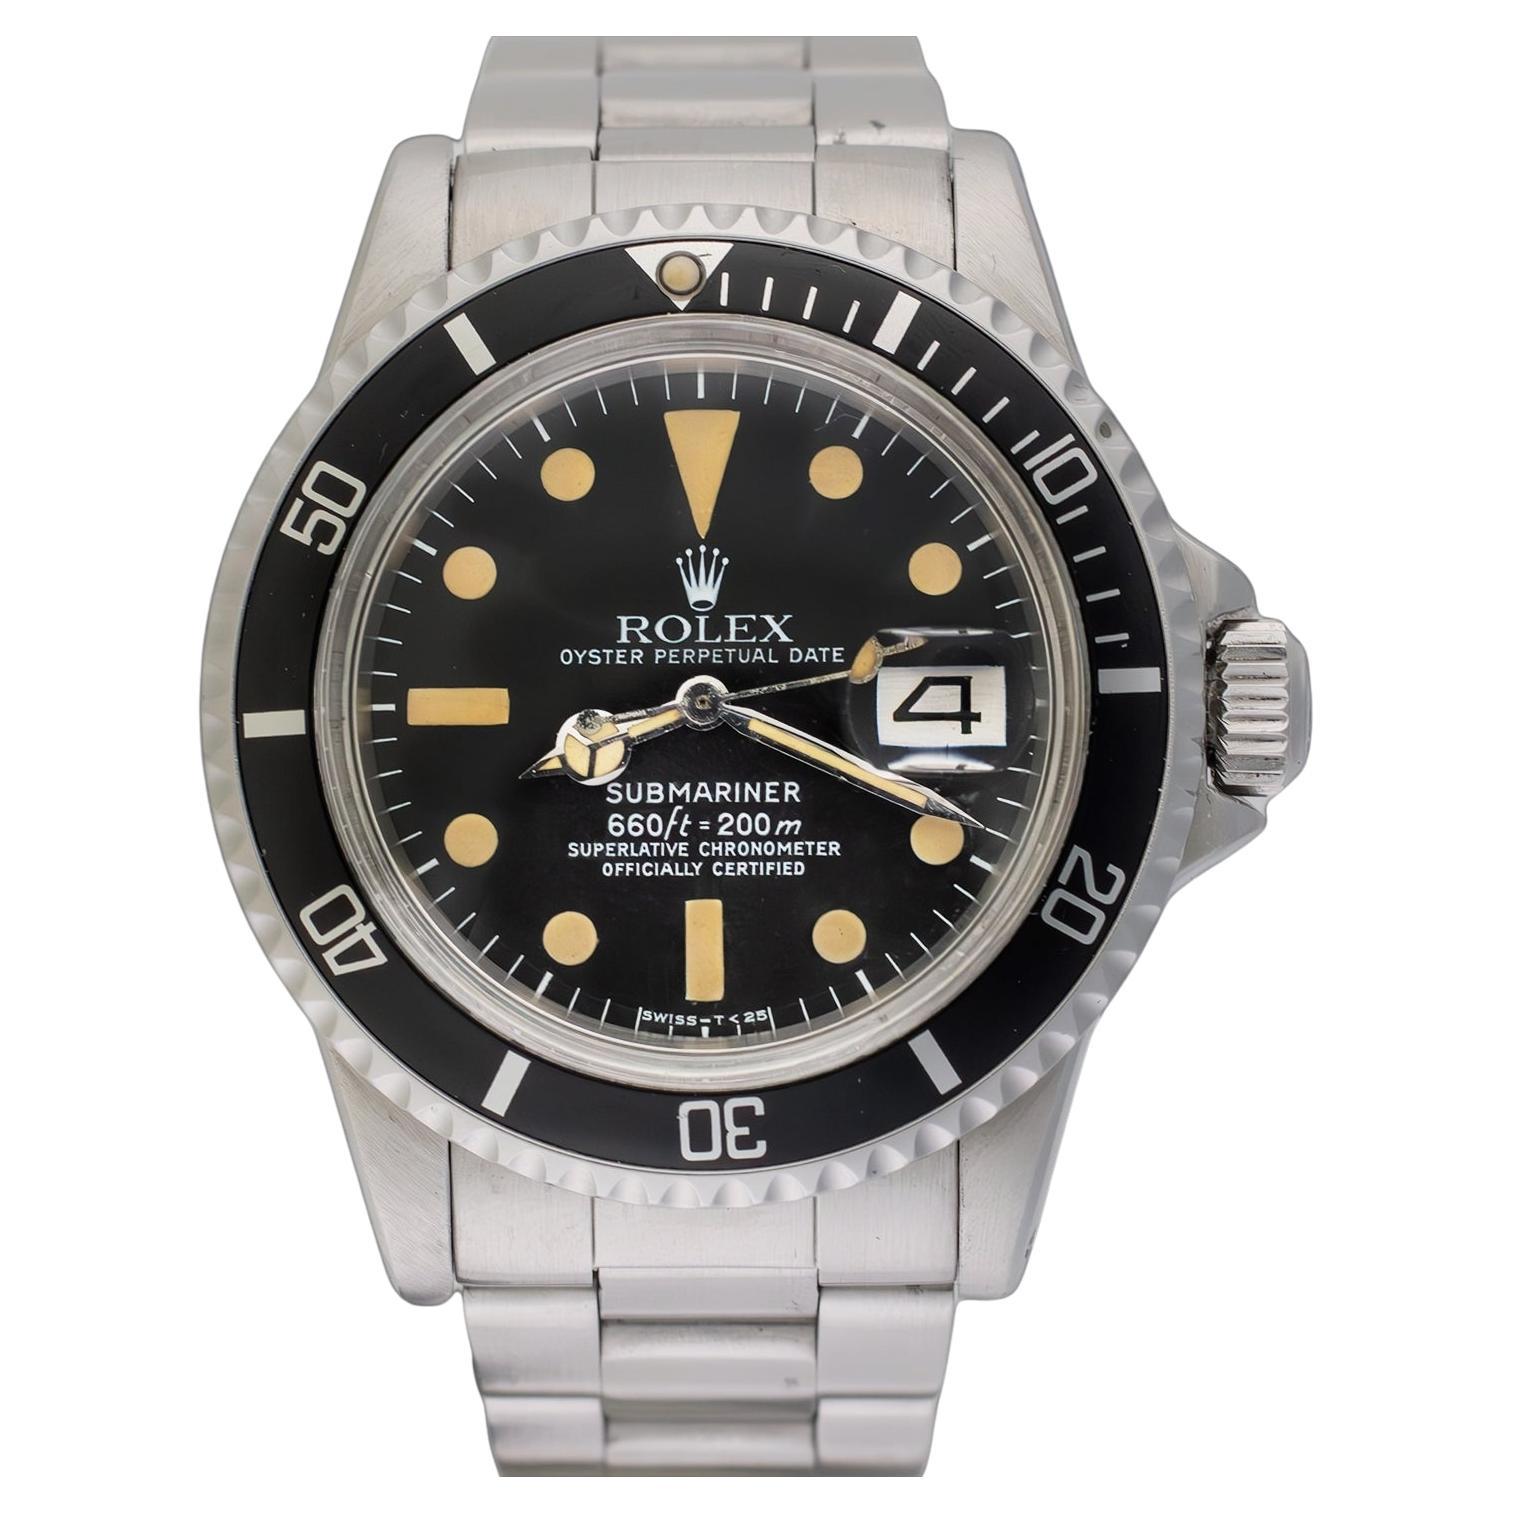 Rolex Submariner Matte Dial with Date 1680 Creamy Steel Automatic Watch, 1974